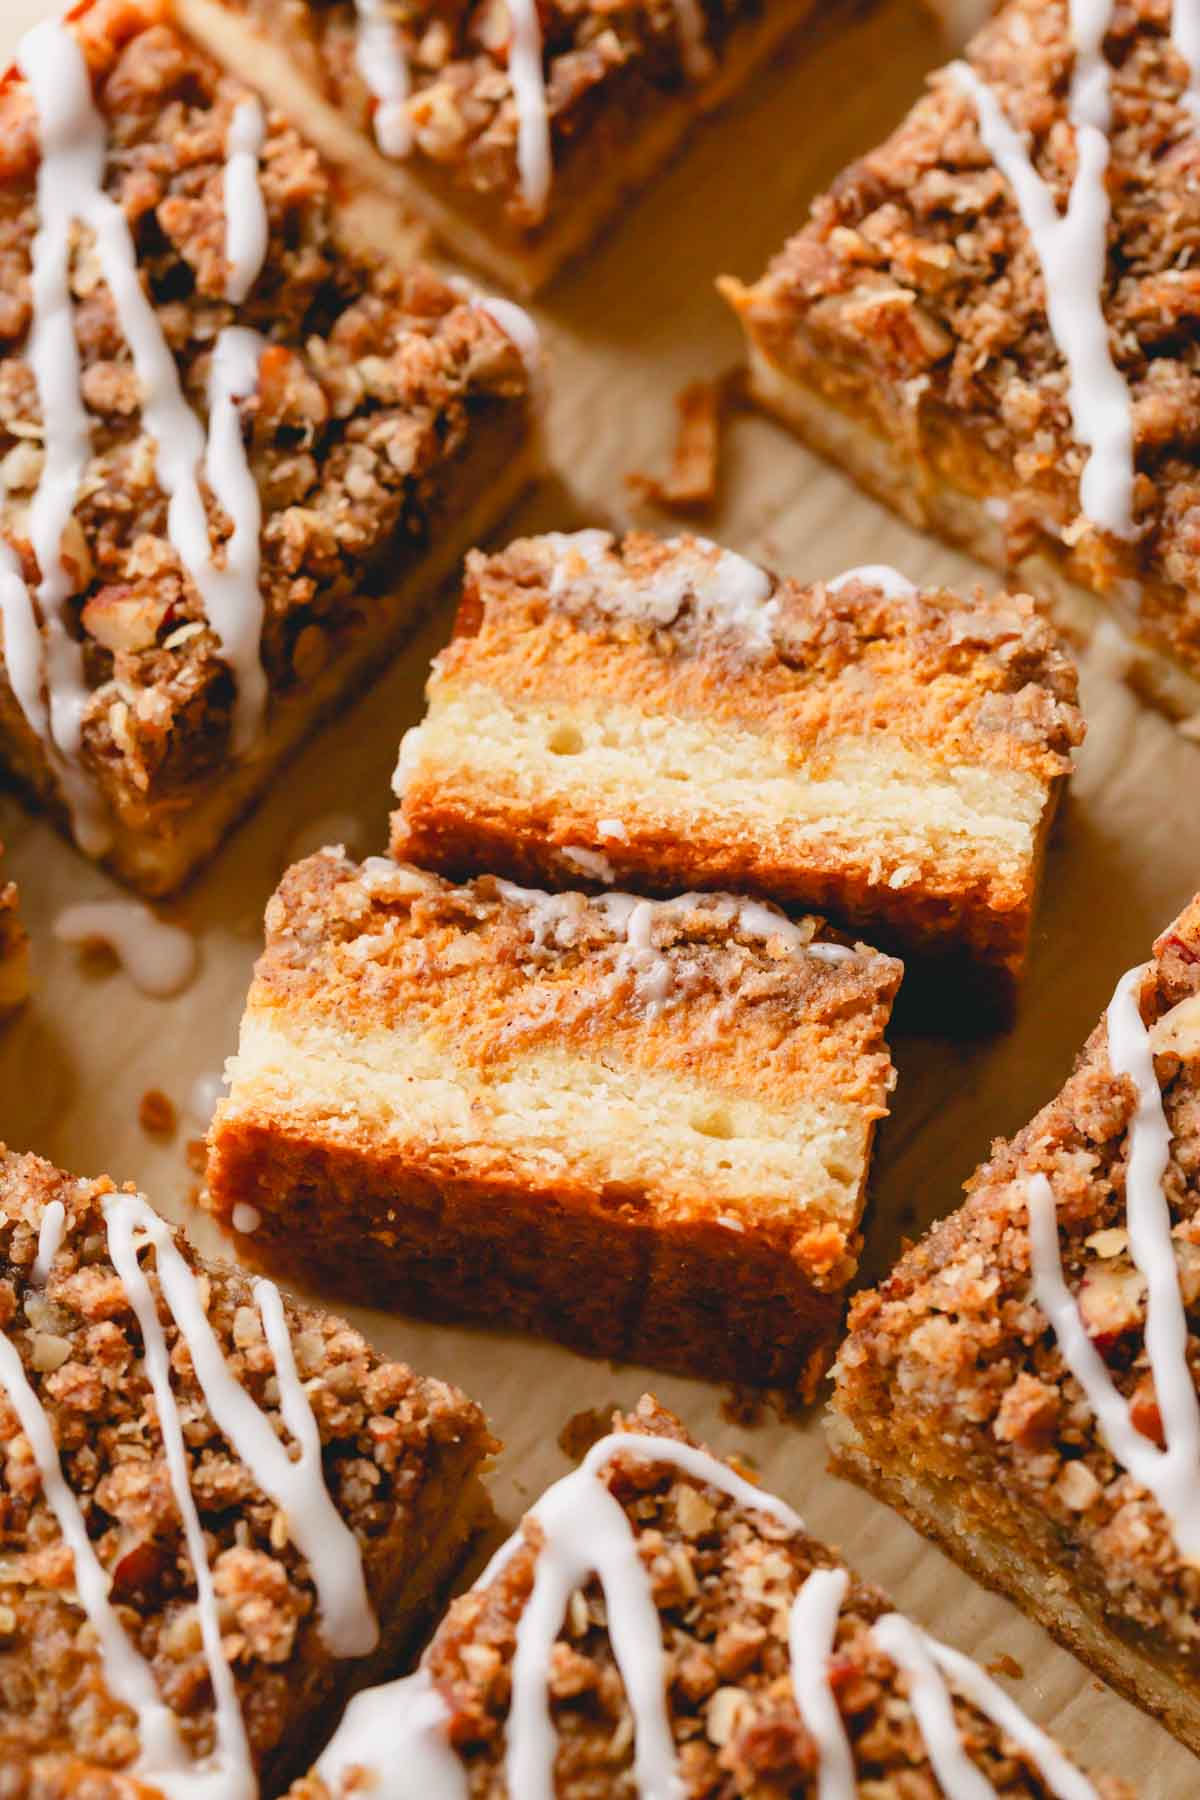 Two pumpkin streusel bars on their side showing the layers of crust and filling surrounded by more bars.